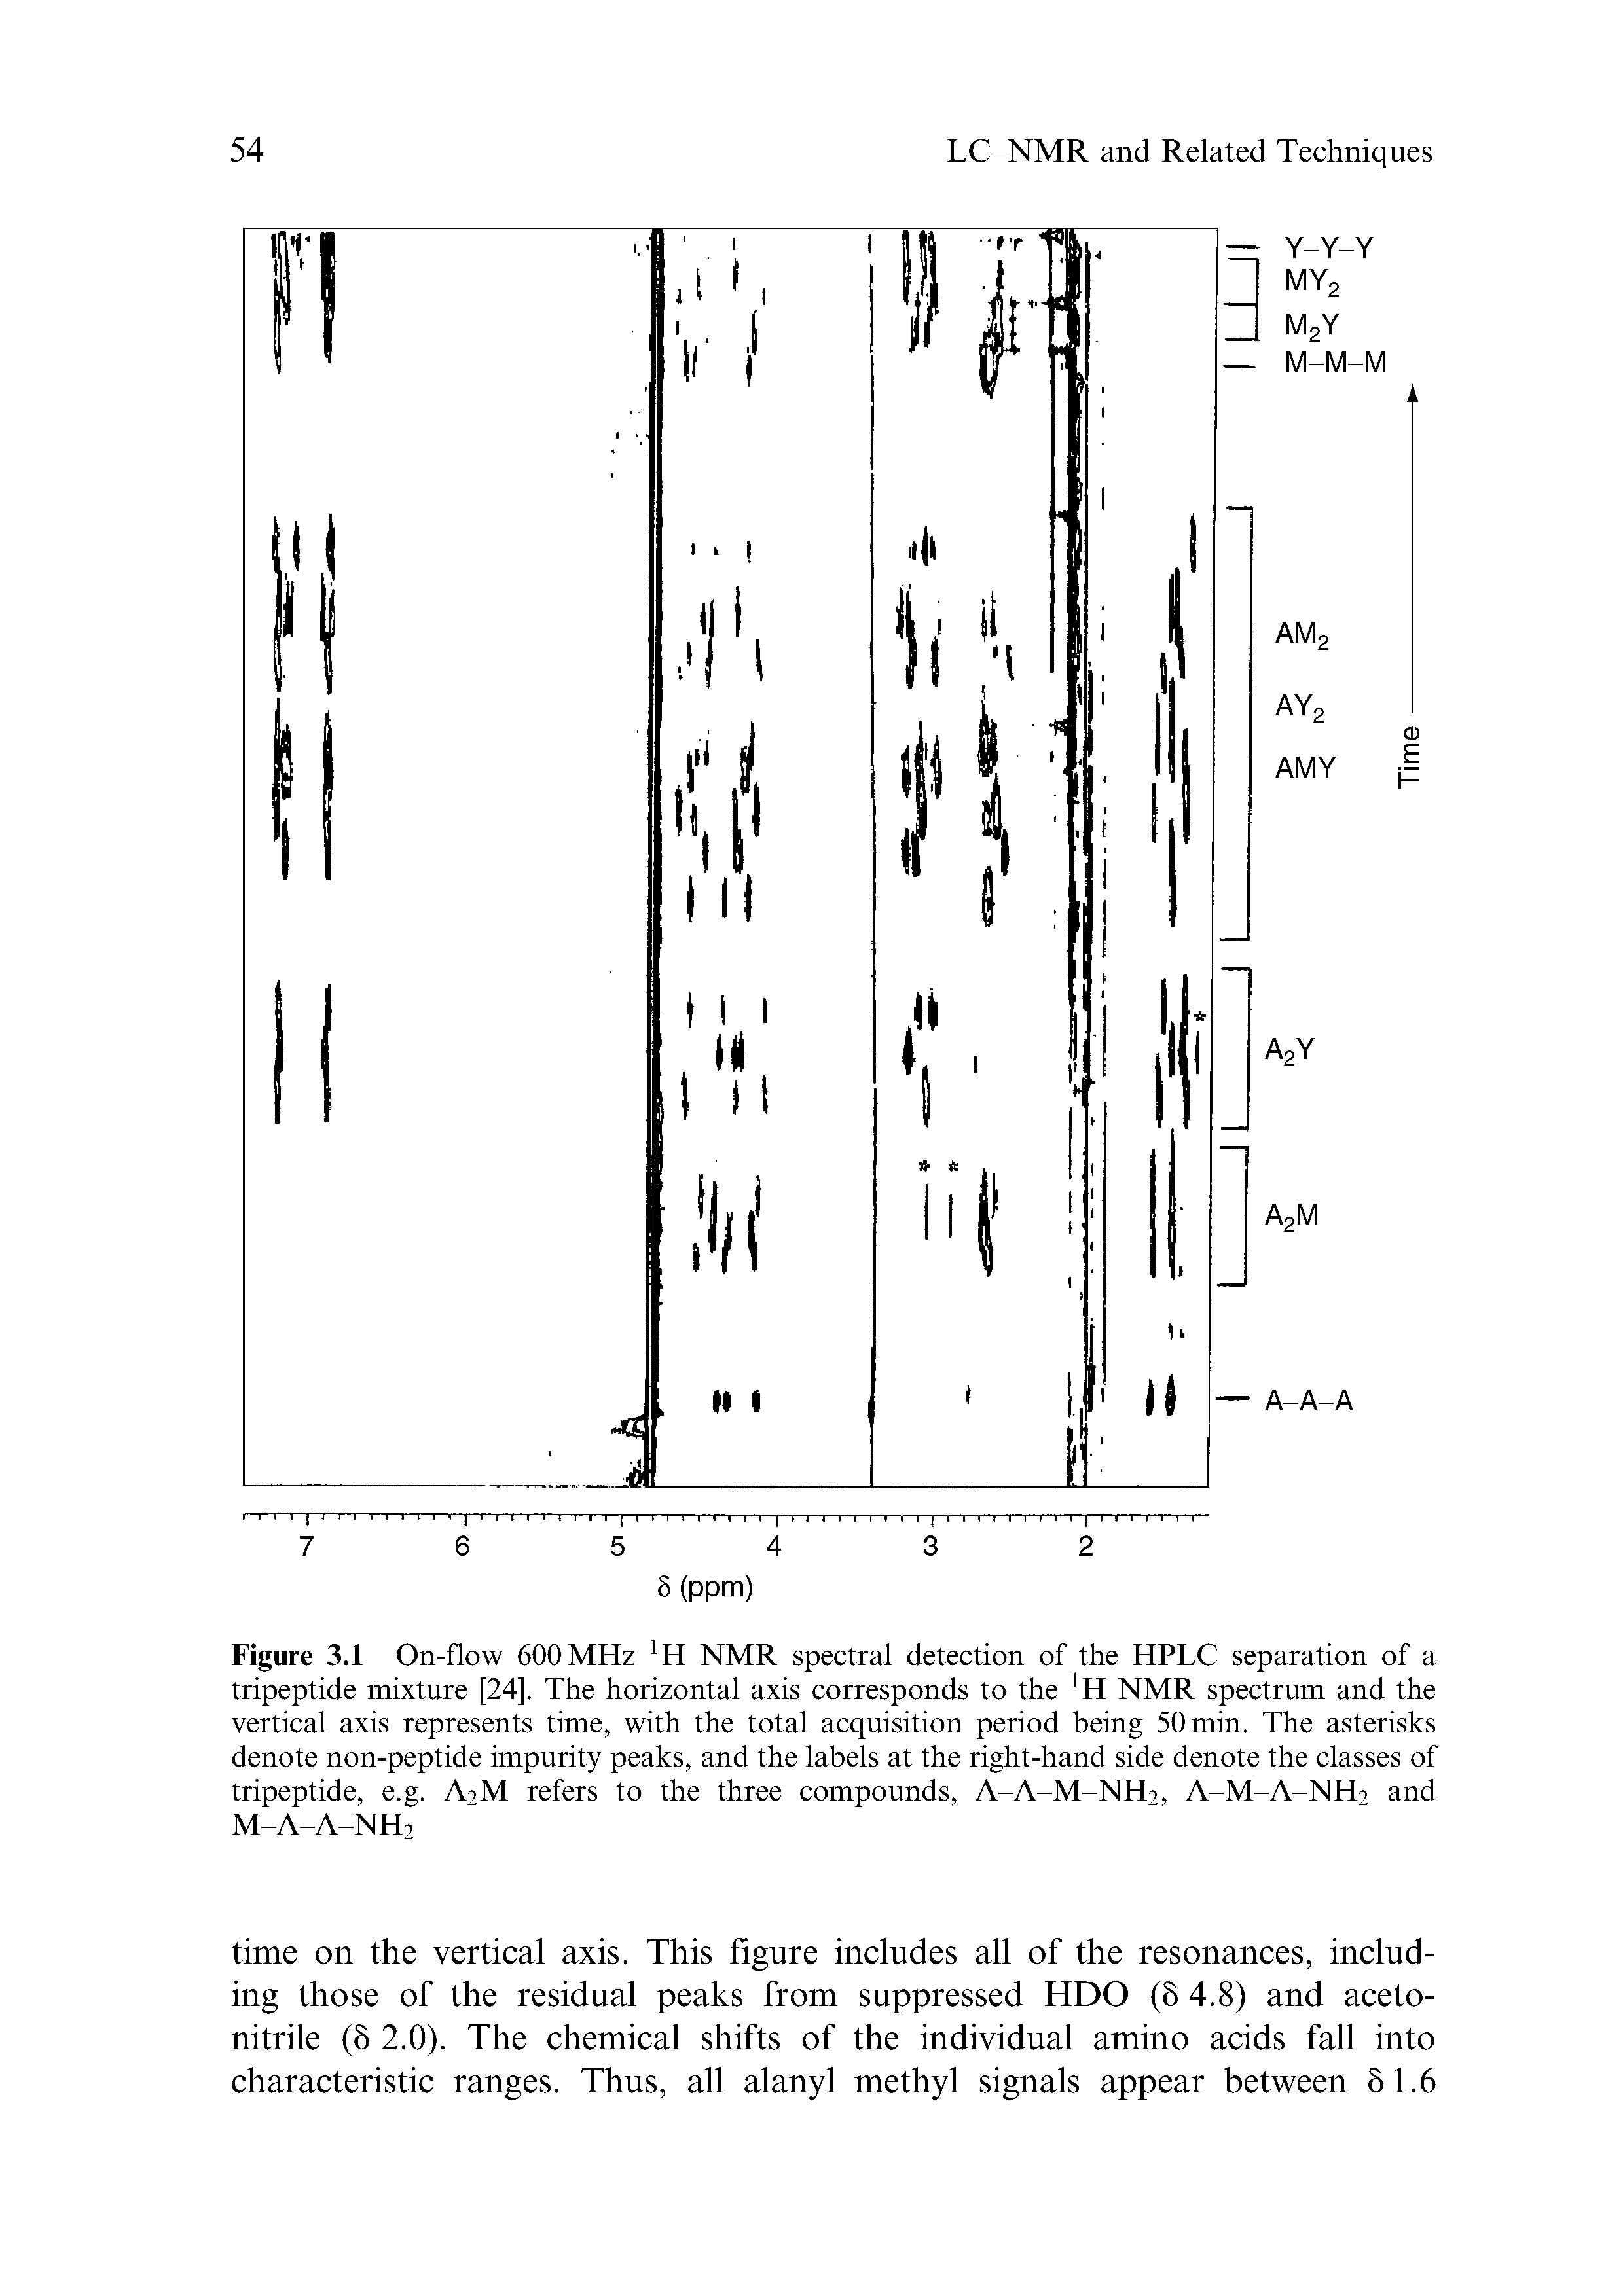 Figure 3.1 On-flow 600 MHz 1 H NMR spectral detection of the HPLC separation of a tripeptide mixture [24]. The horizontal axis corresponds to the 1 H NMR spectrum and the vertical axis represents time, with the total acquisition period being 50 min. The asterisks denote non-peptide impurity peaks, and the labels at the right-hand side denote the classes of tripeptide, e.g. A2M refers to the three compounds, A-A-M-NH2, A-M-A-NH2 and M-A-A-NH2...